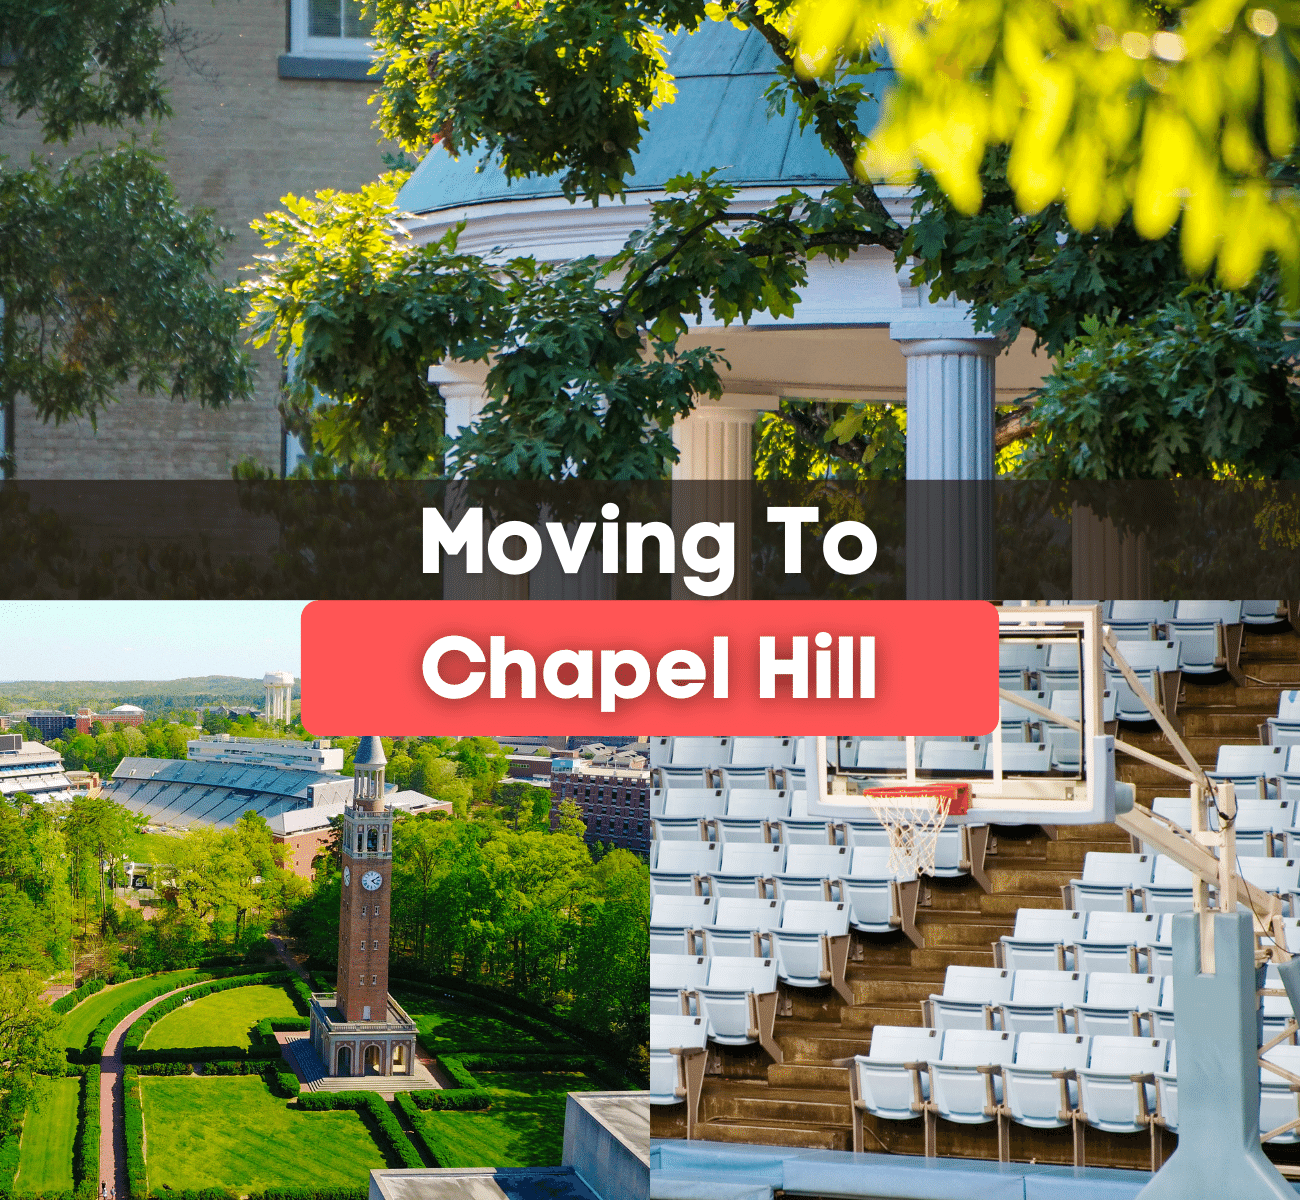 Moving to Chapel Hill, NC - What is it like living in Chapel Hill?